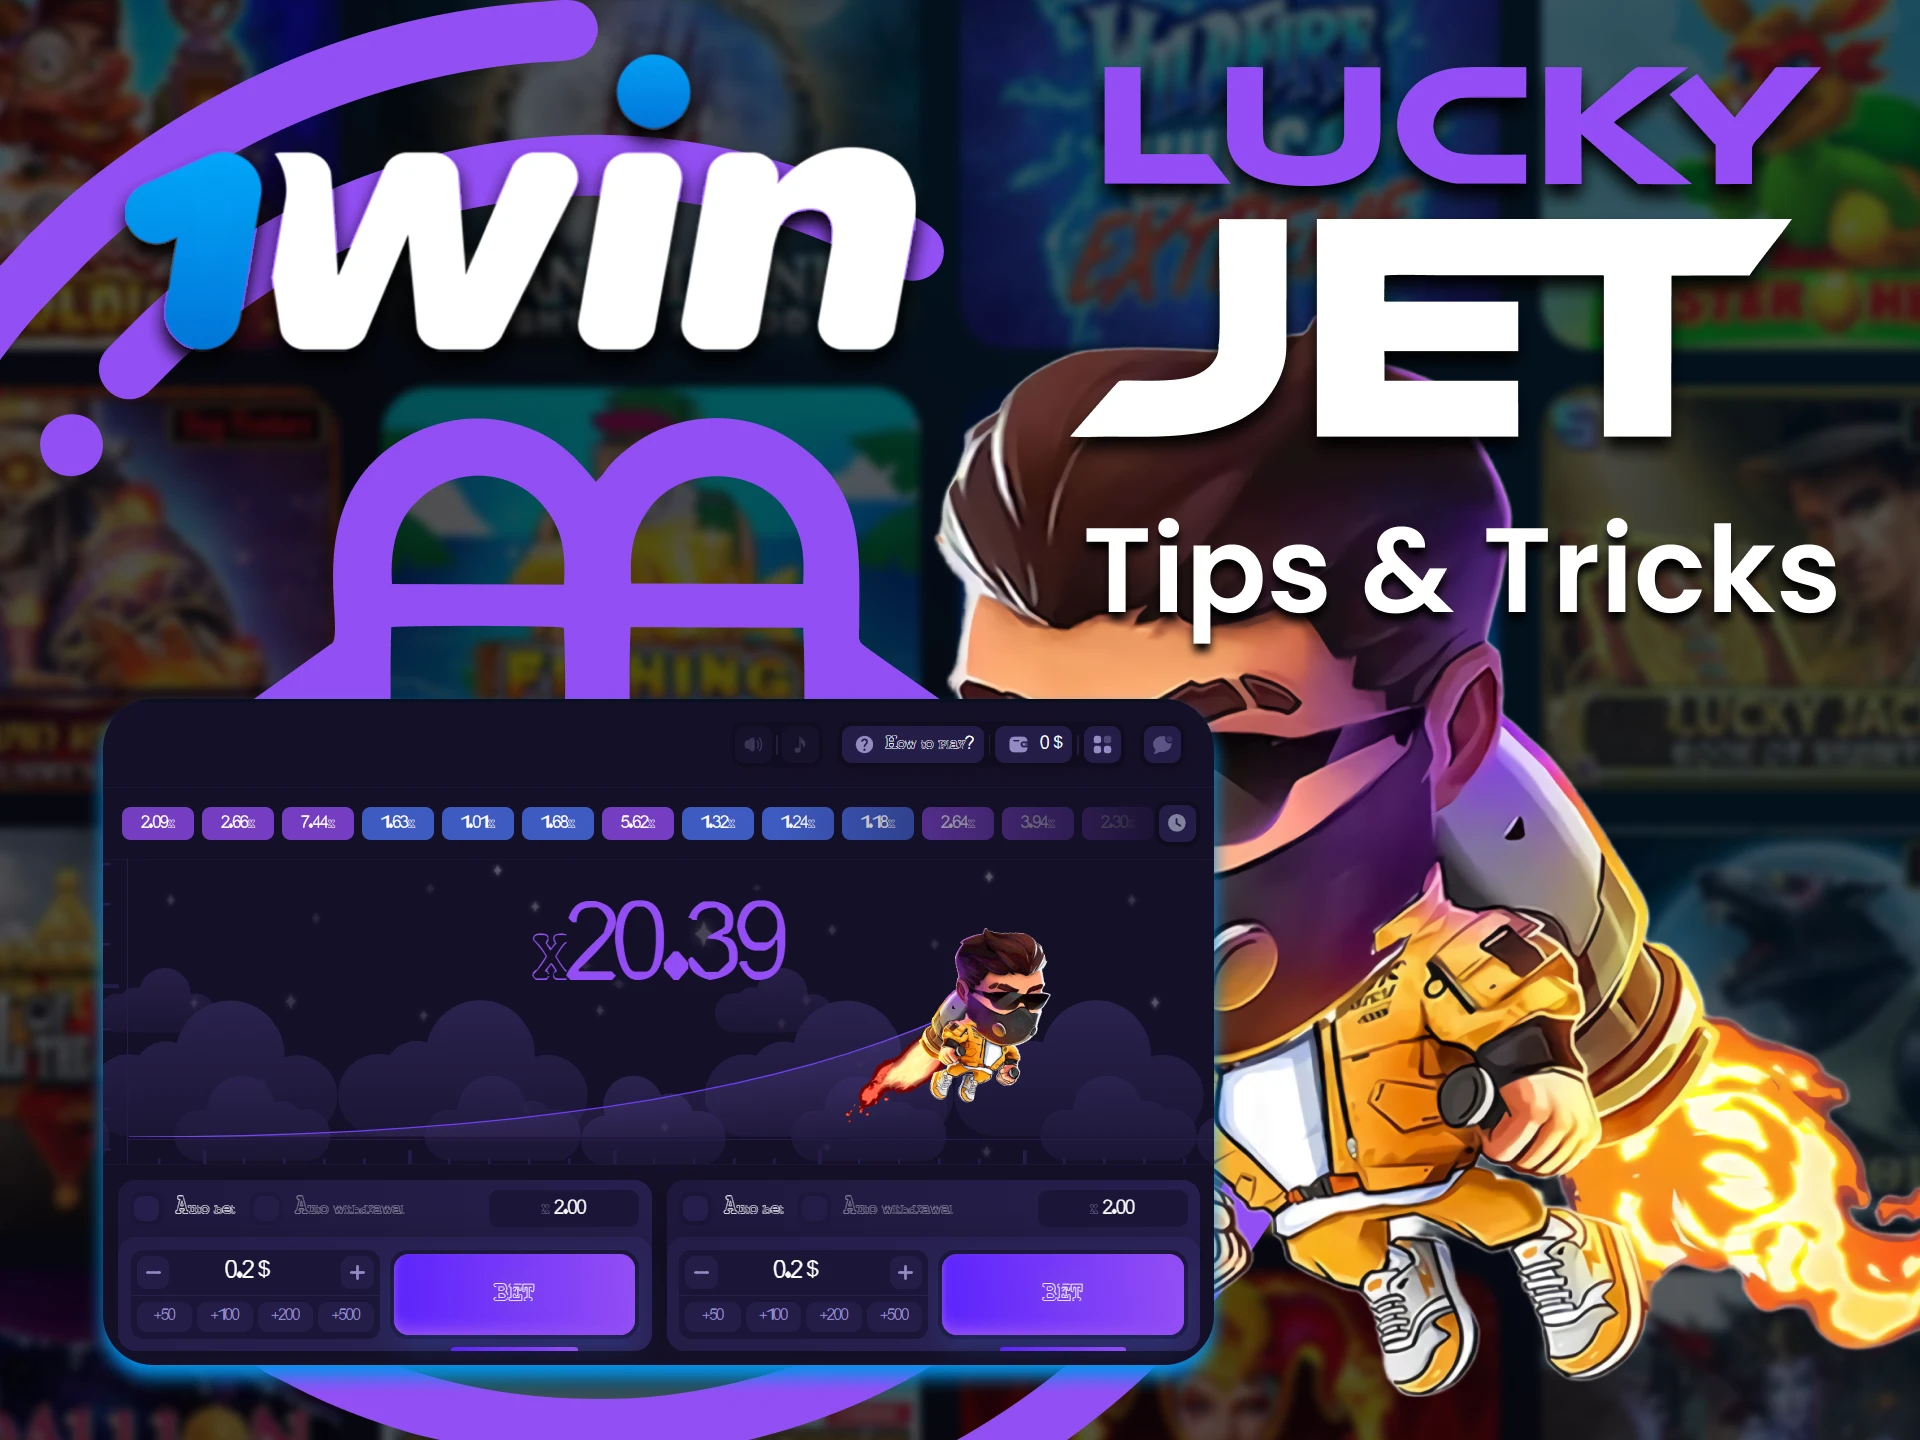 Find out tips and tricks for playing Lucky Jet on 1Win.